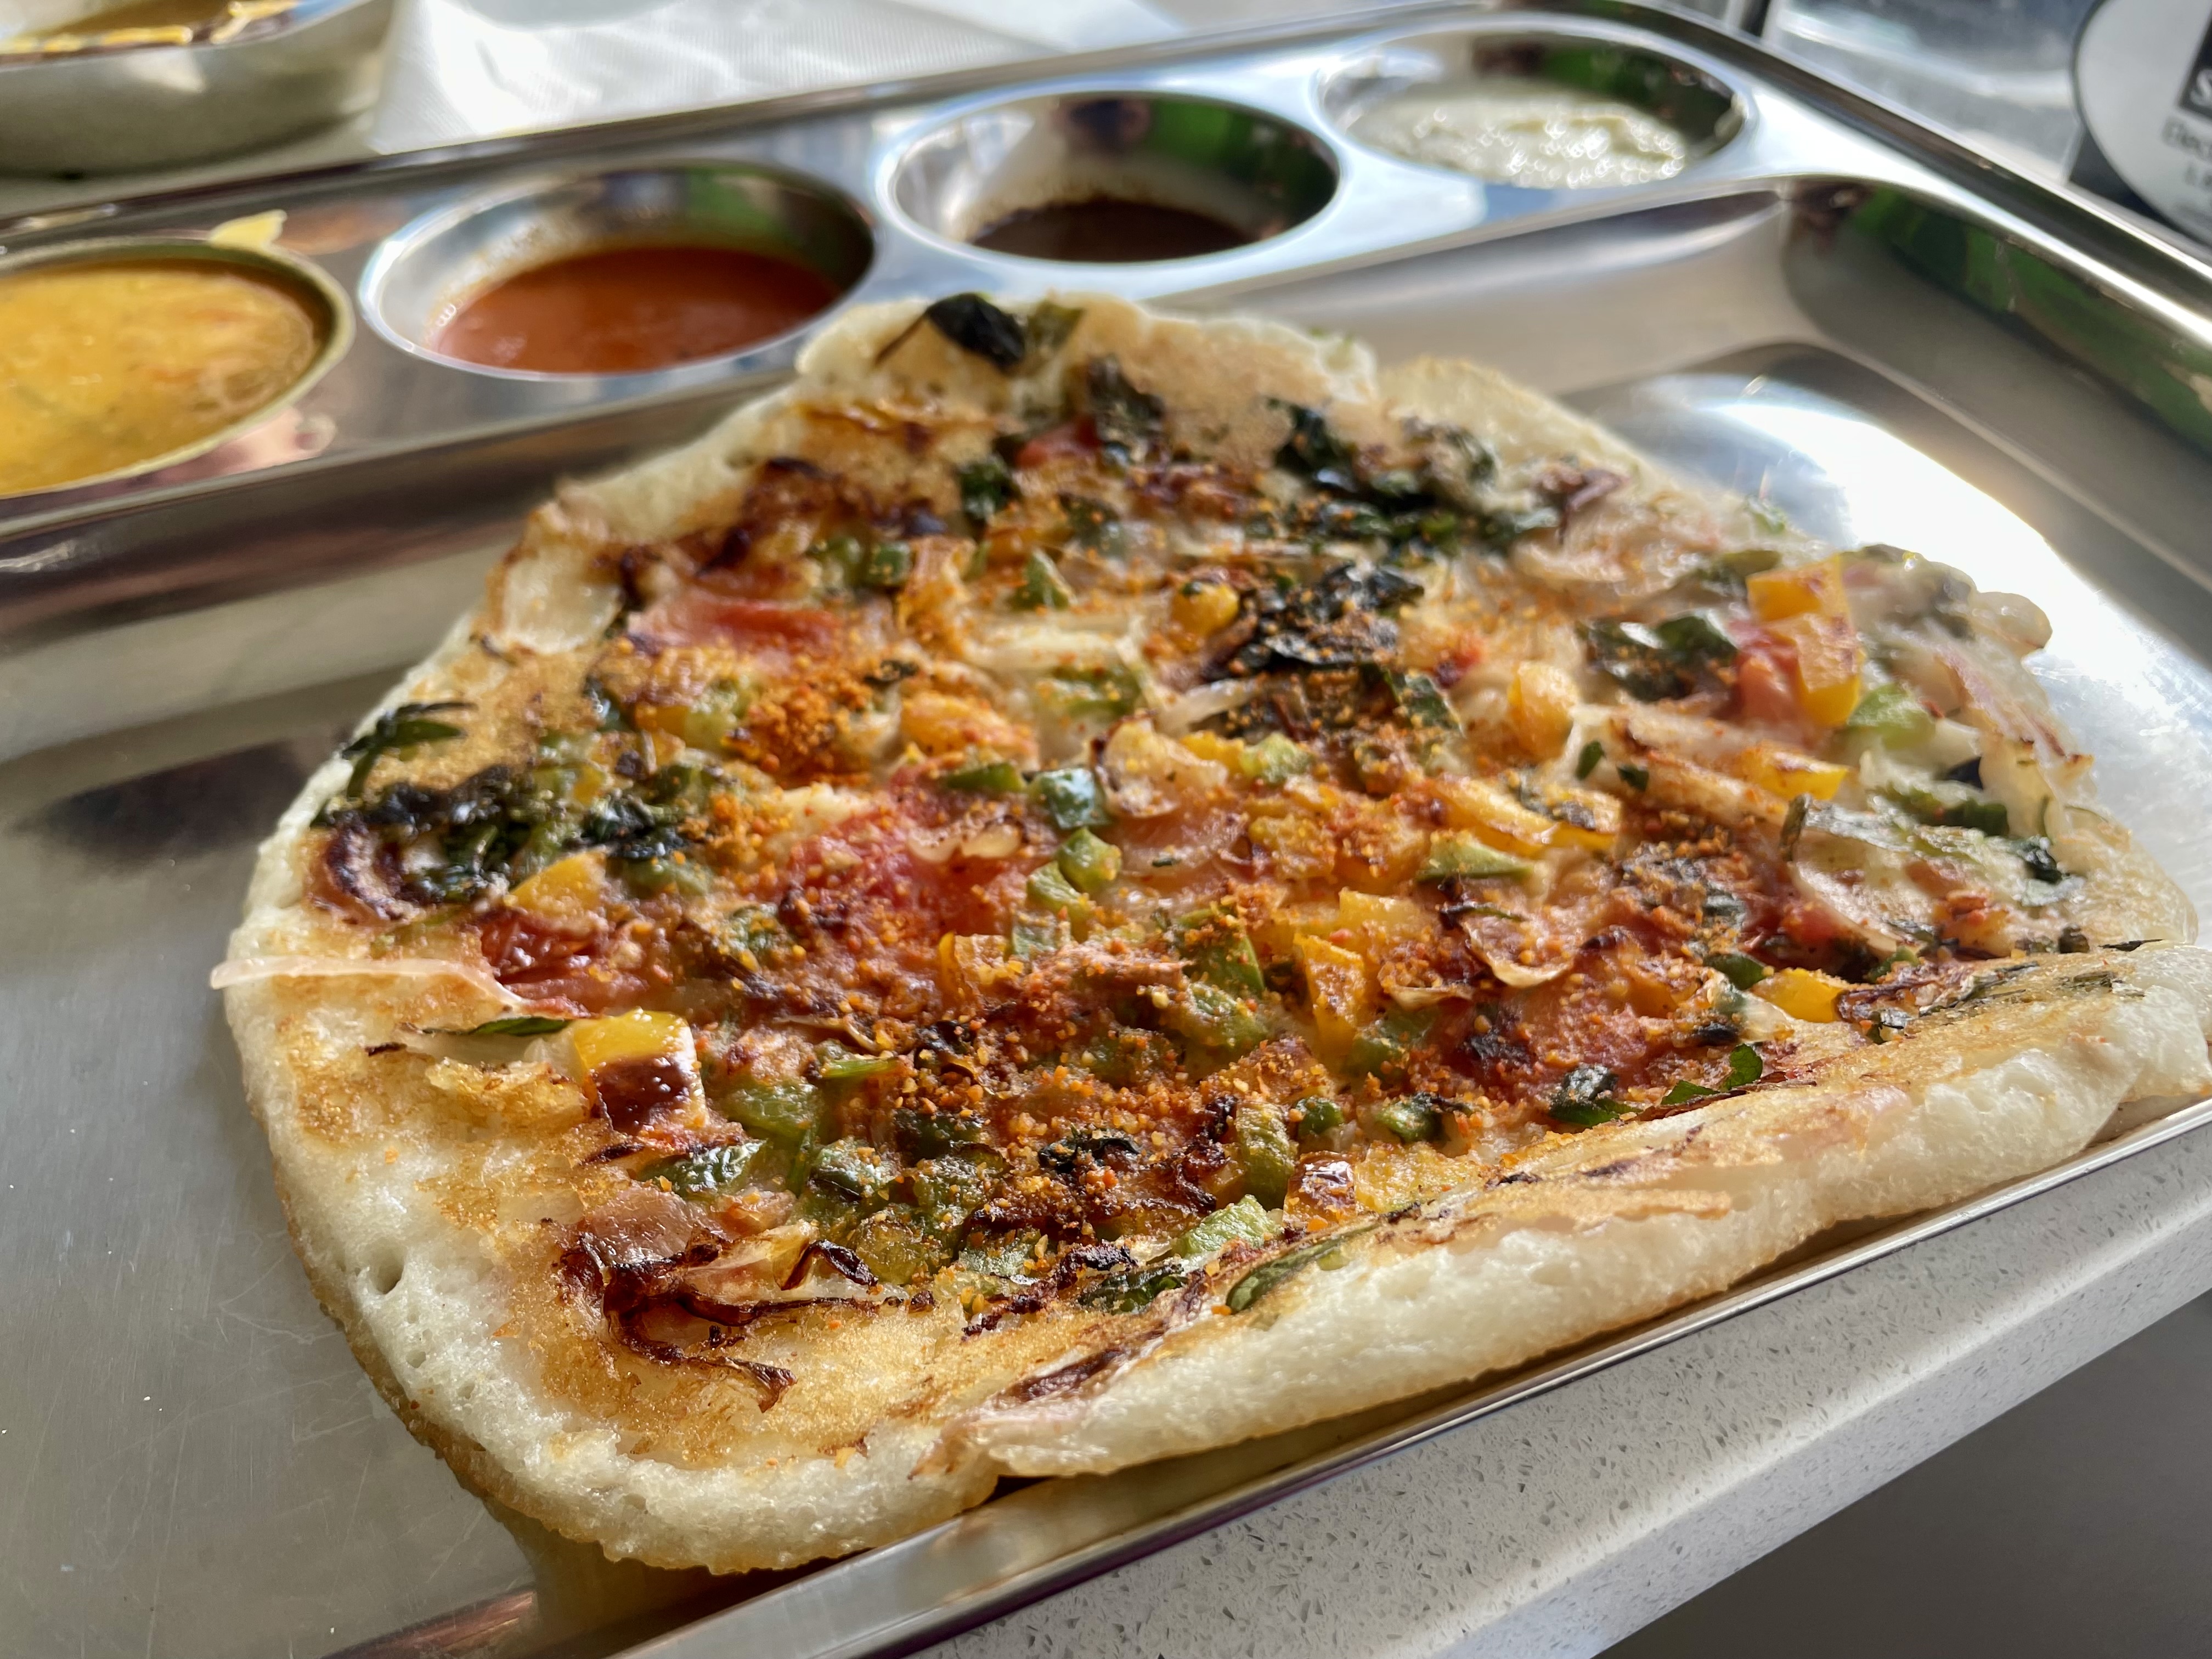 Unlike a typical dosa, which is crisp and crepe-like, an uttapam is thicker, with toppings